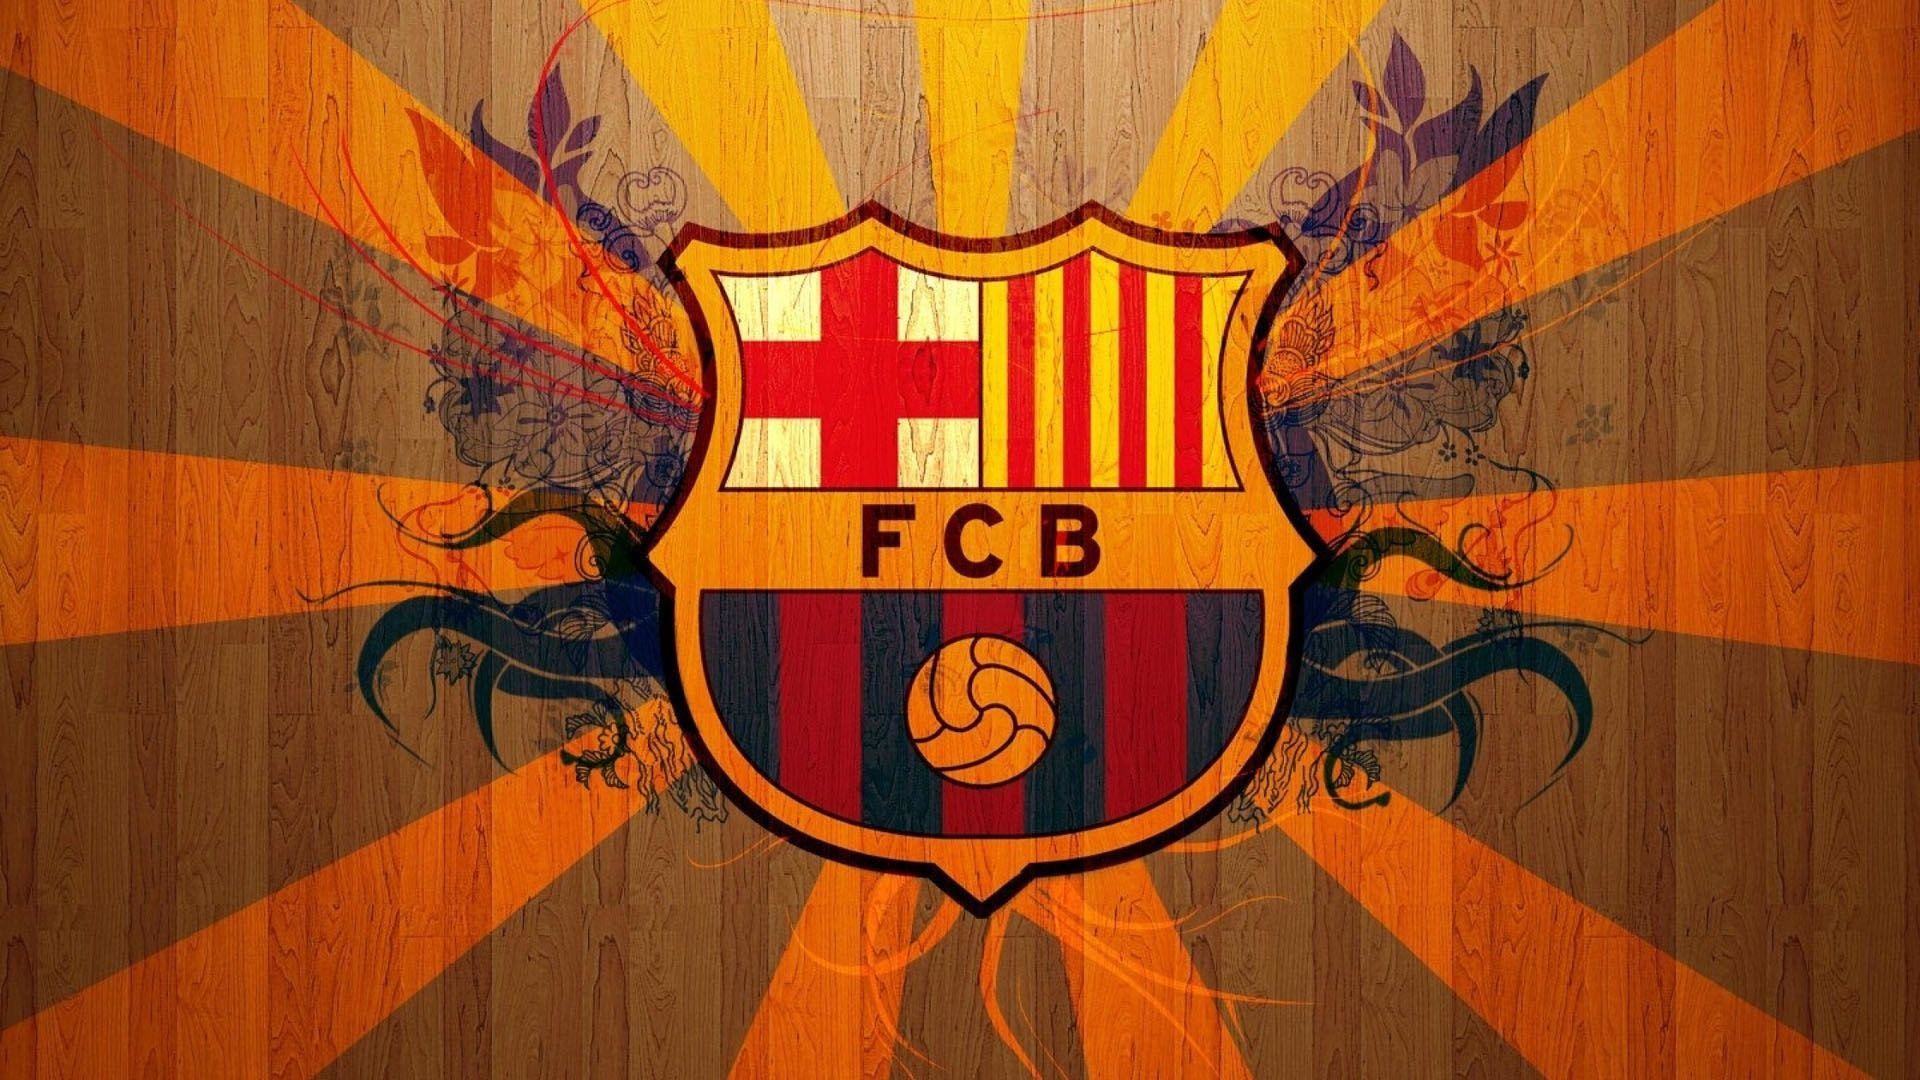 1920x1080 FC Barcelona Live Images, HD Wallpapers - SH.VM Wallpapers